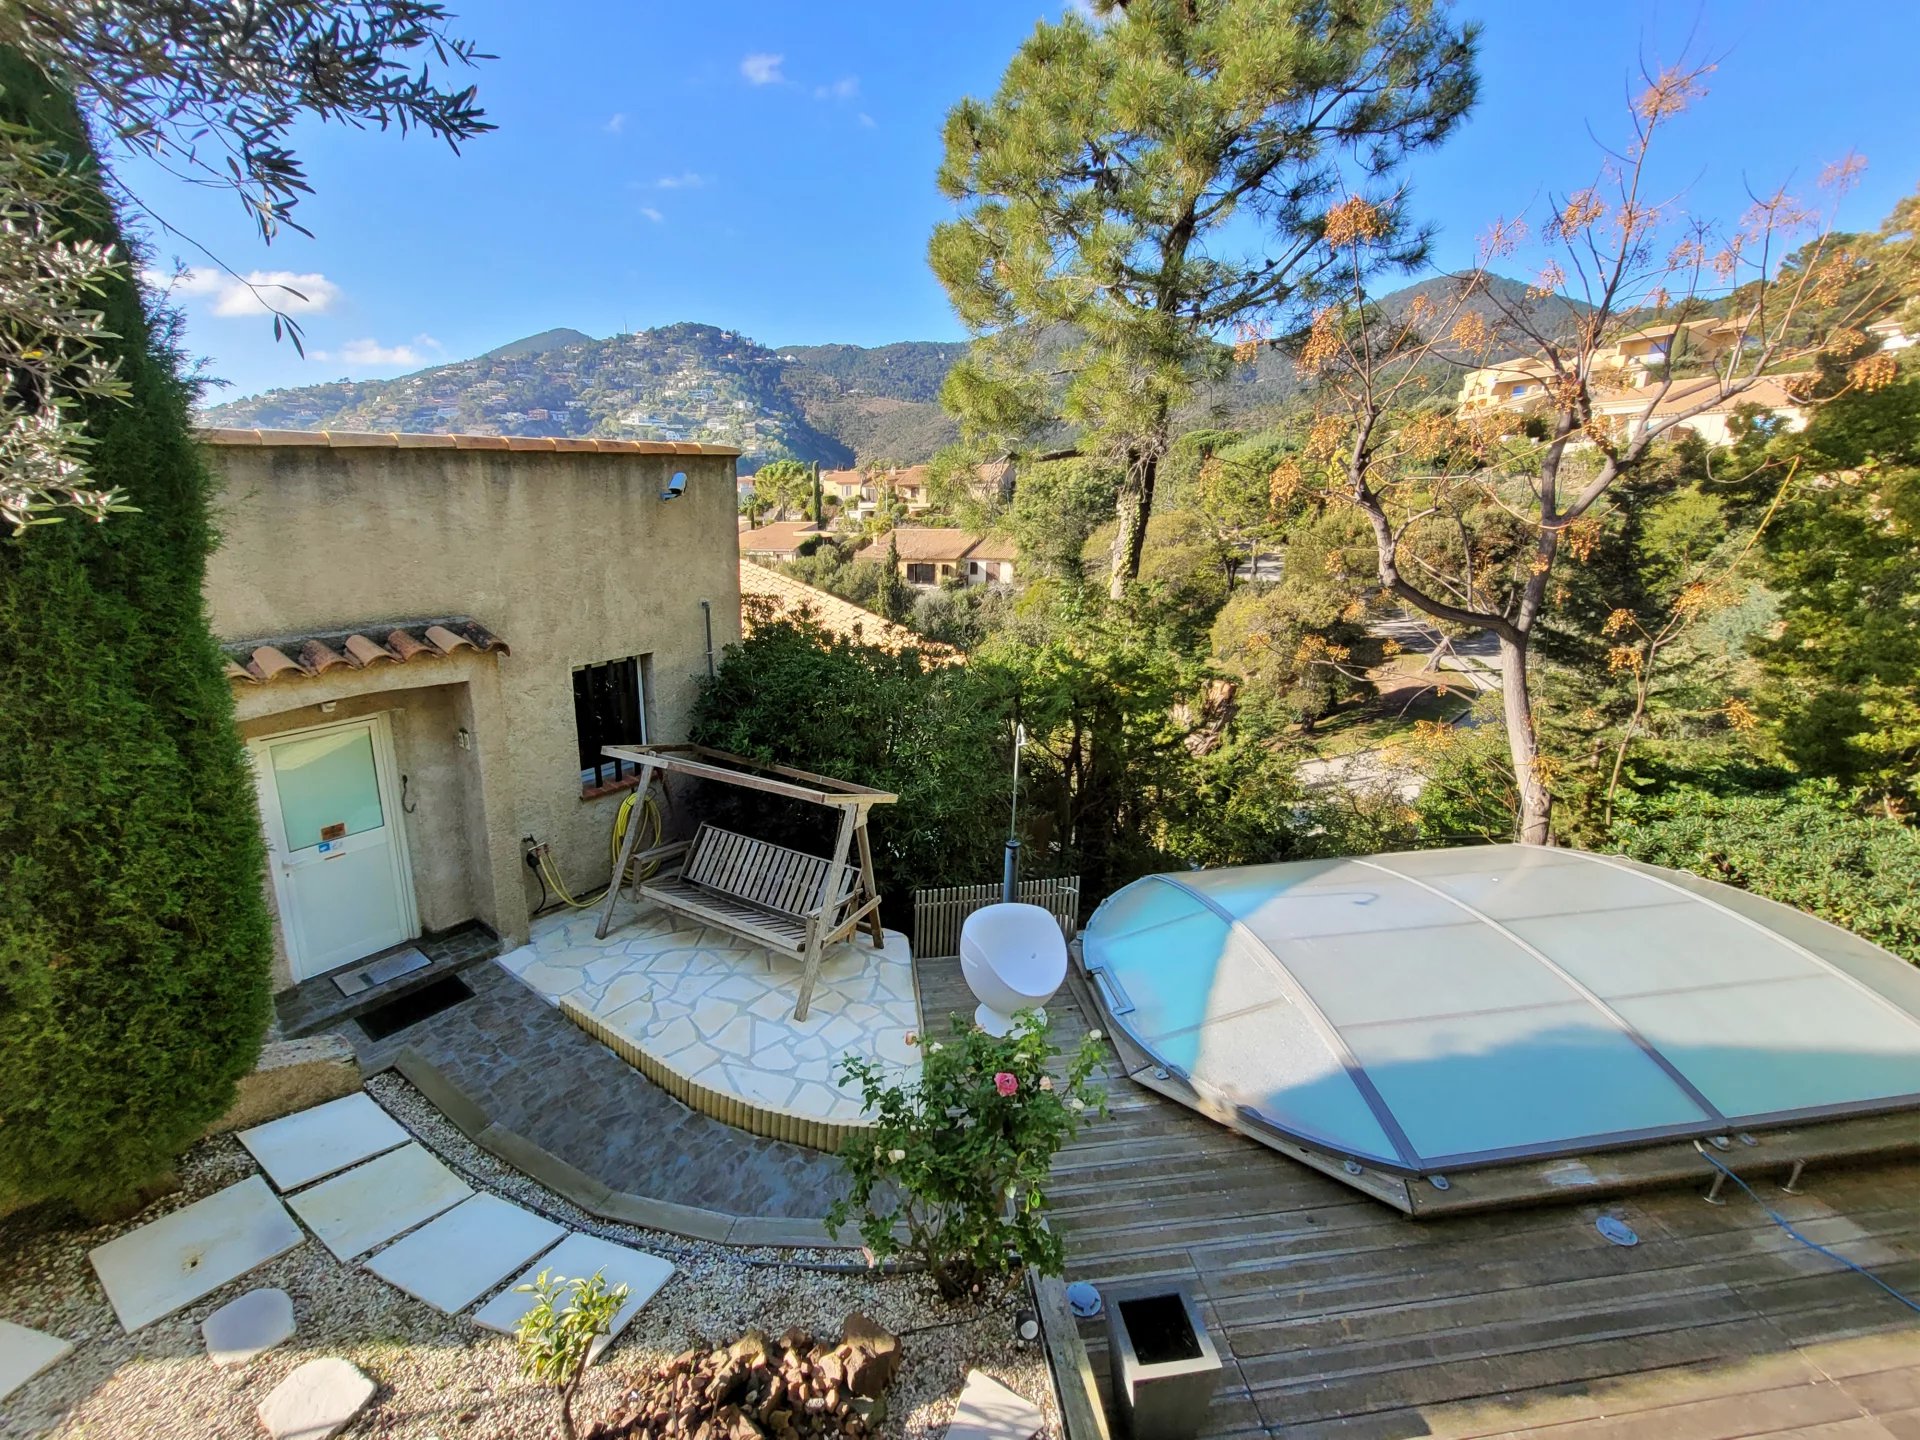 Charming house with 2/3 rooms and a garden of 460 m².